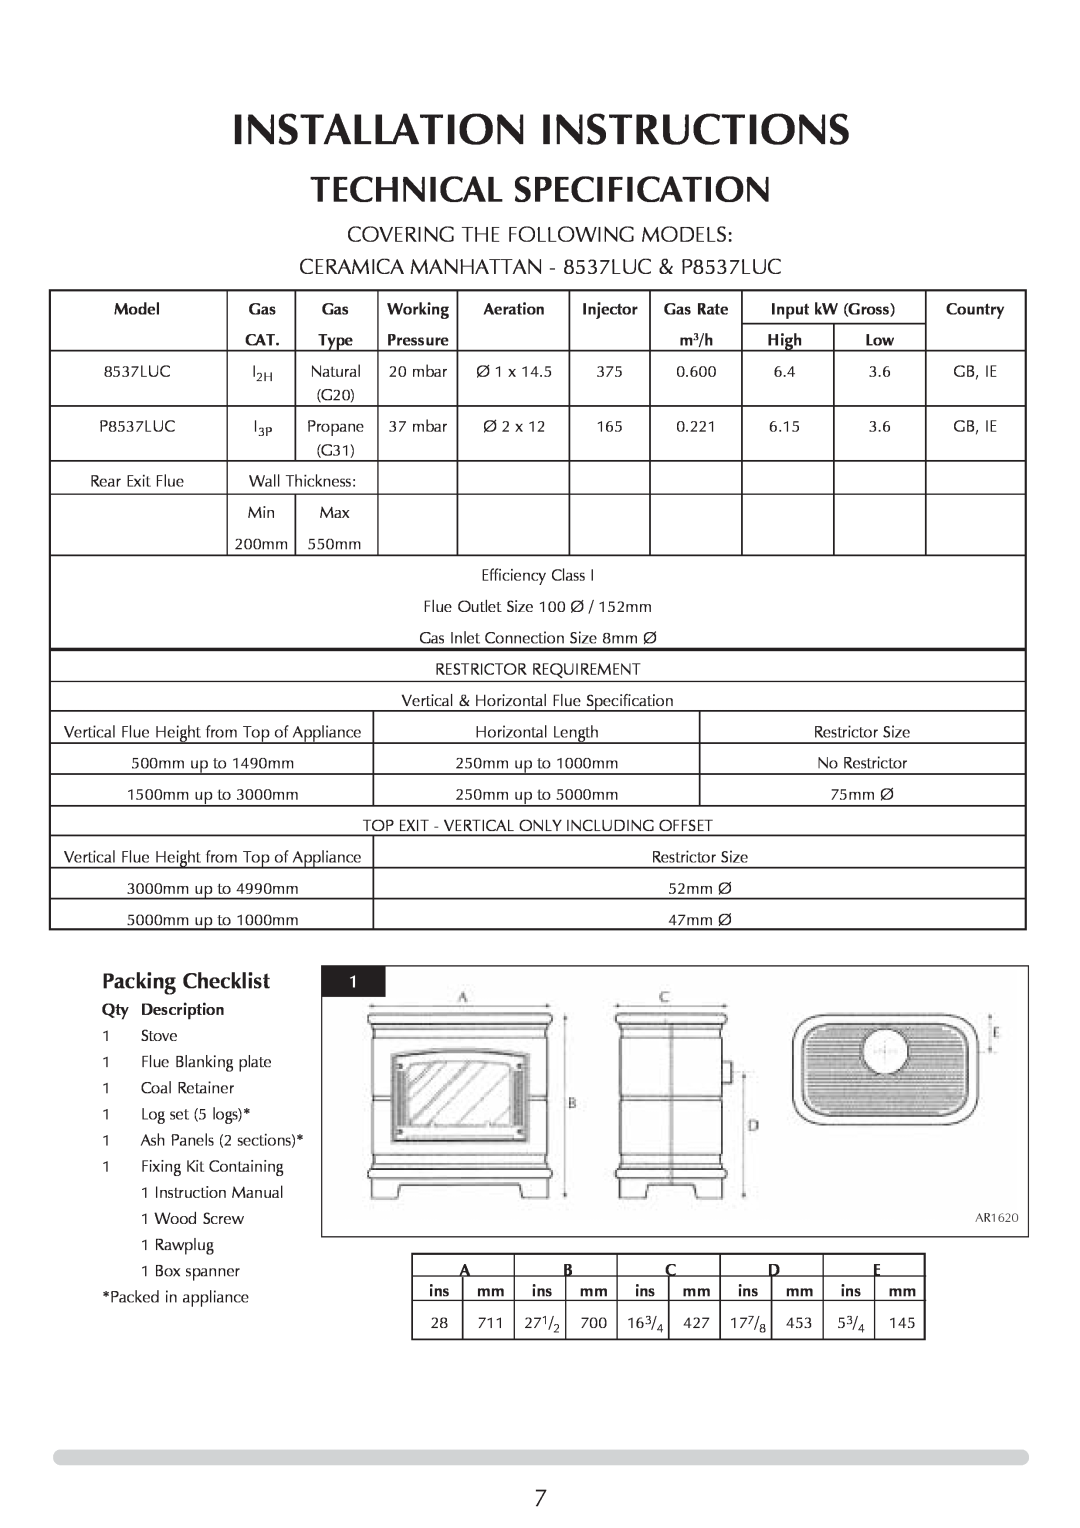 Stovax Ceramica Manhattan Wood Stove Installation Instructions, Technical Specification, Covering The Following Models 